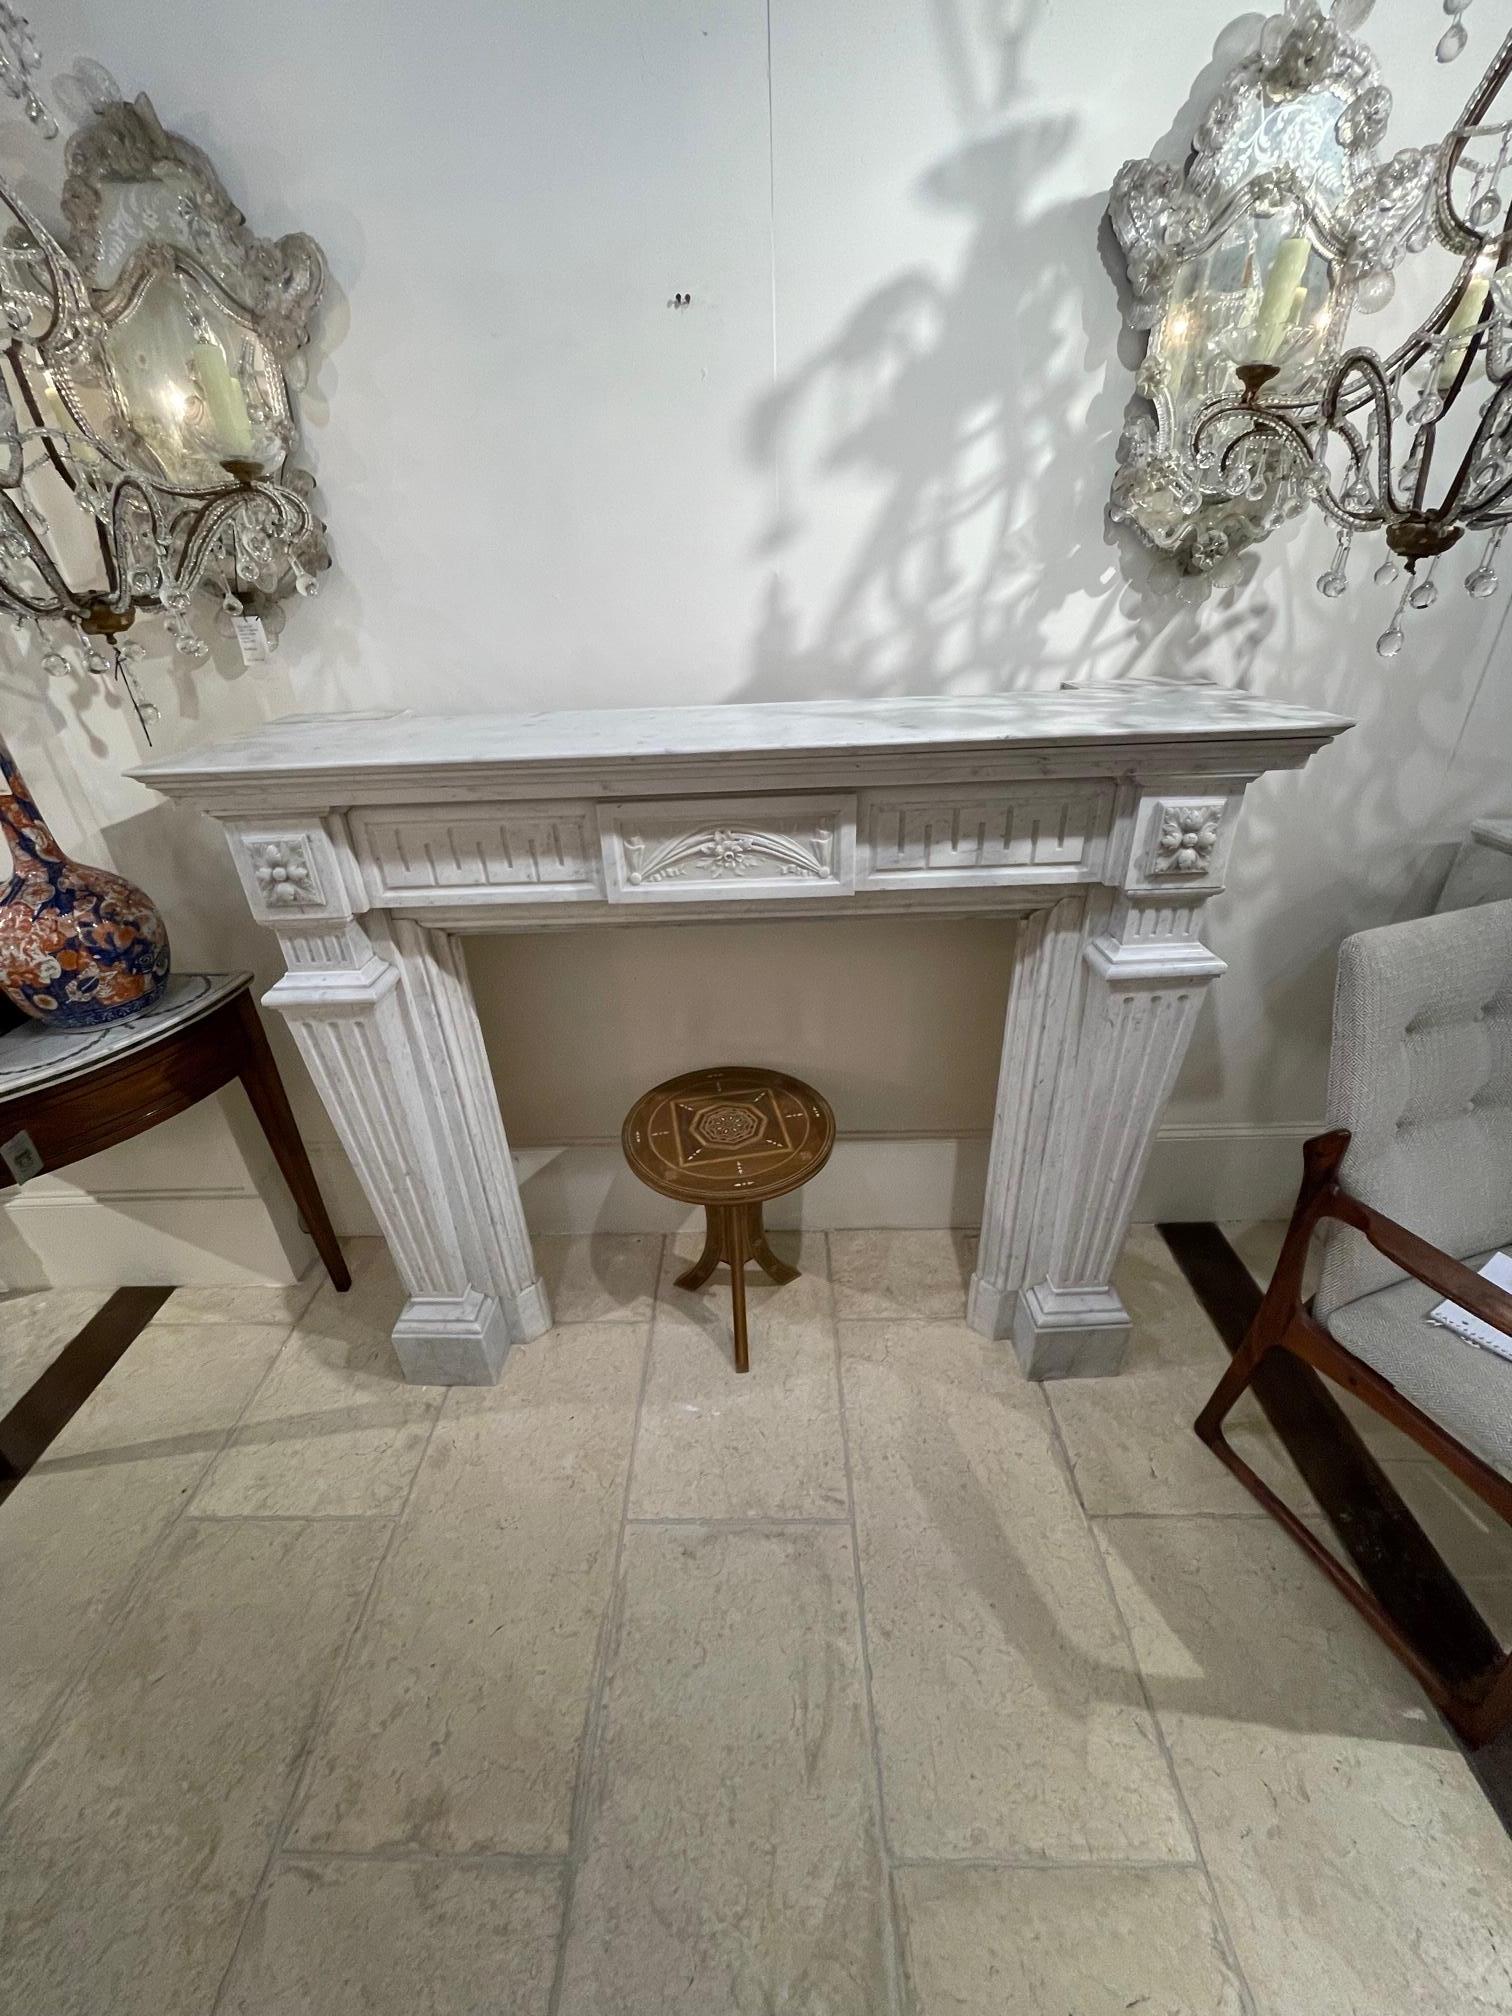 Impressive large scale 19th century French Louis XVI style carrara marble mantel. Beautiful decorative pattern including Greek key pattern and flowers. A truly exceptional piece that would be a real focal point in a fine home!
Note: The breast pate